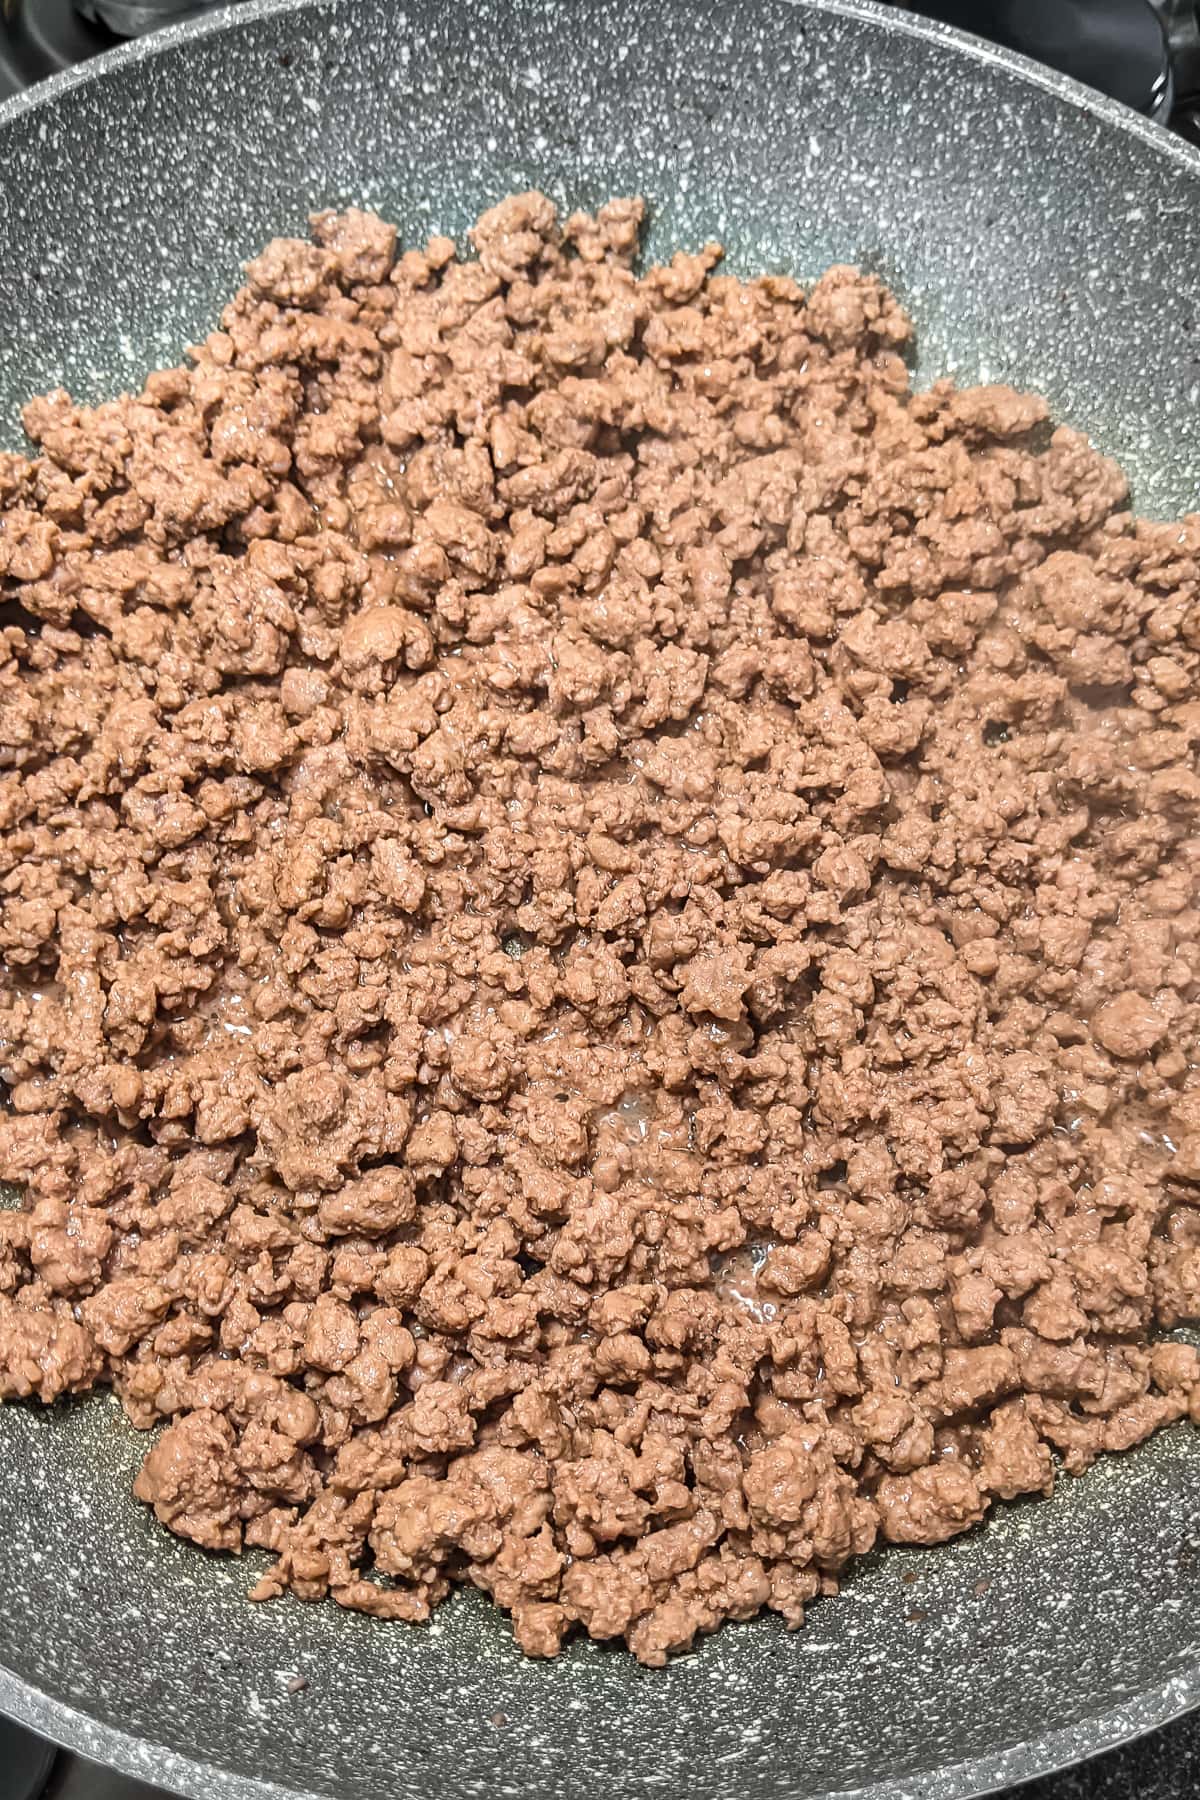 Fried ground beef in a frying pan.